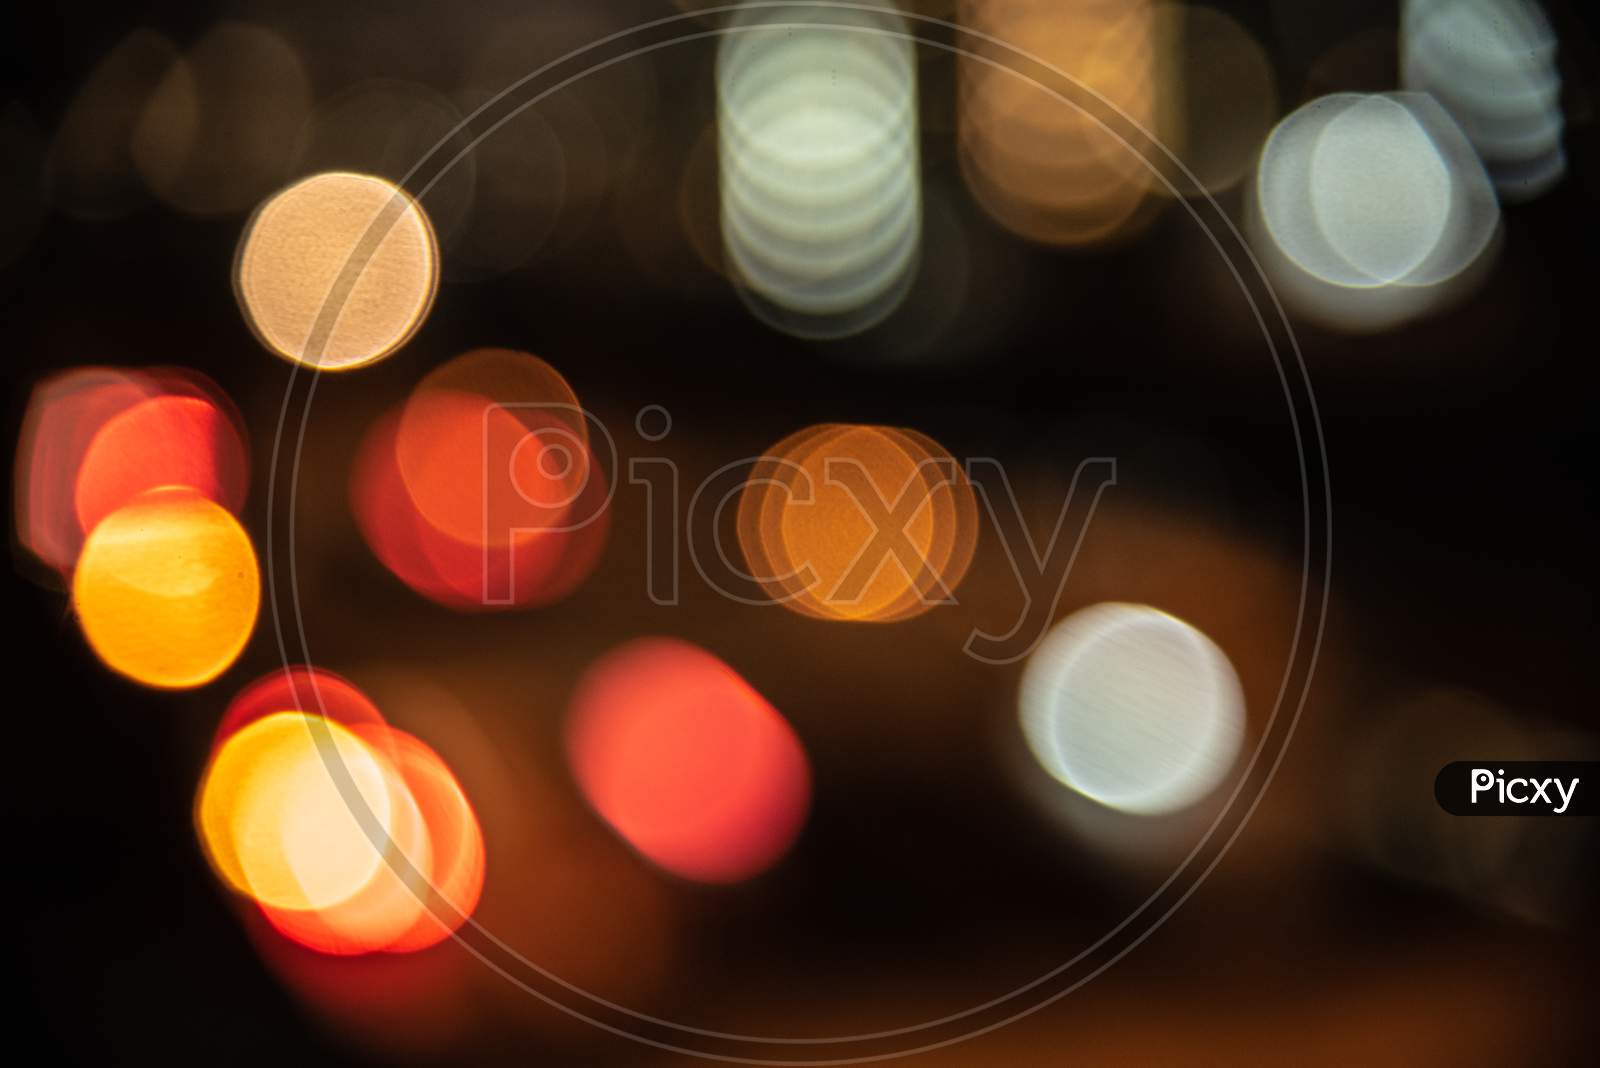 Blurry Background Of City Light In The Nightlife. Abstract And Wallpaper Concept. Traffic And Metropolis Theme. Defocused Photo